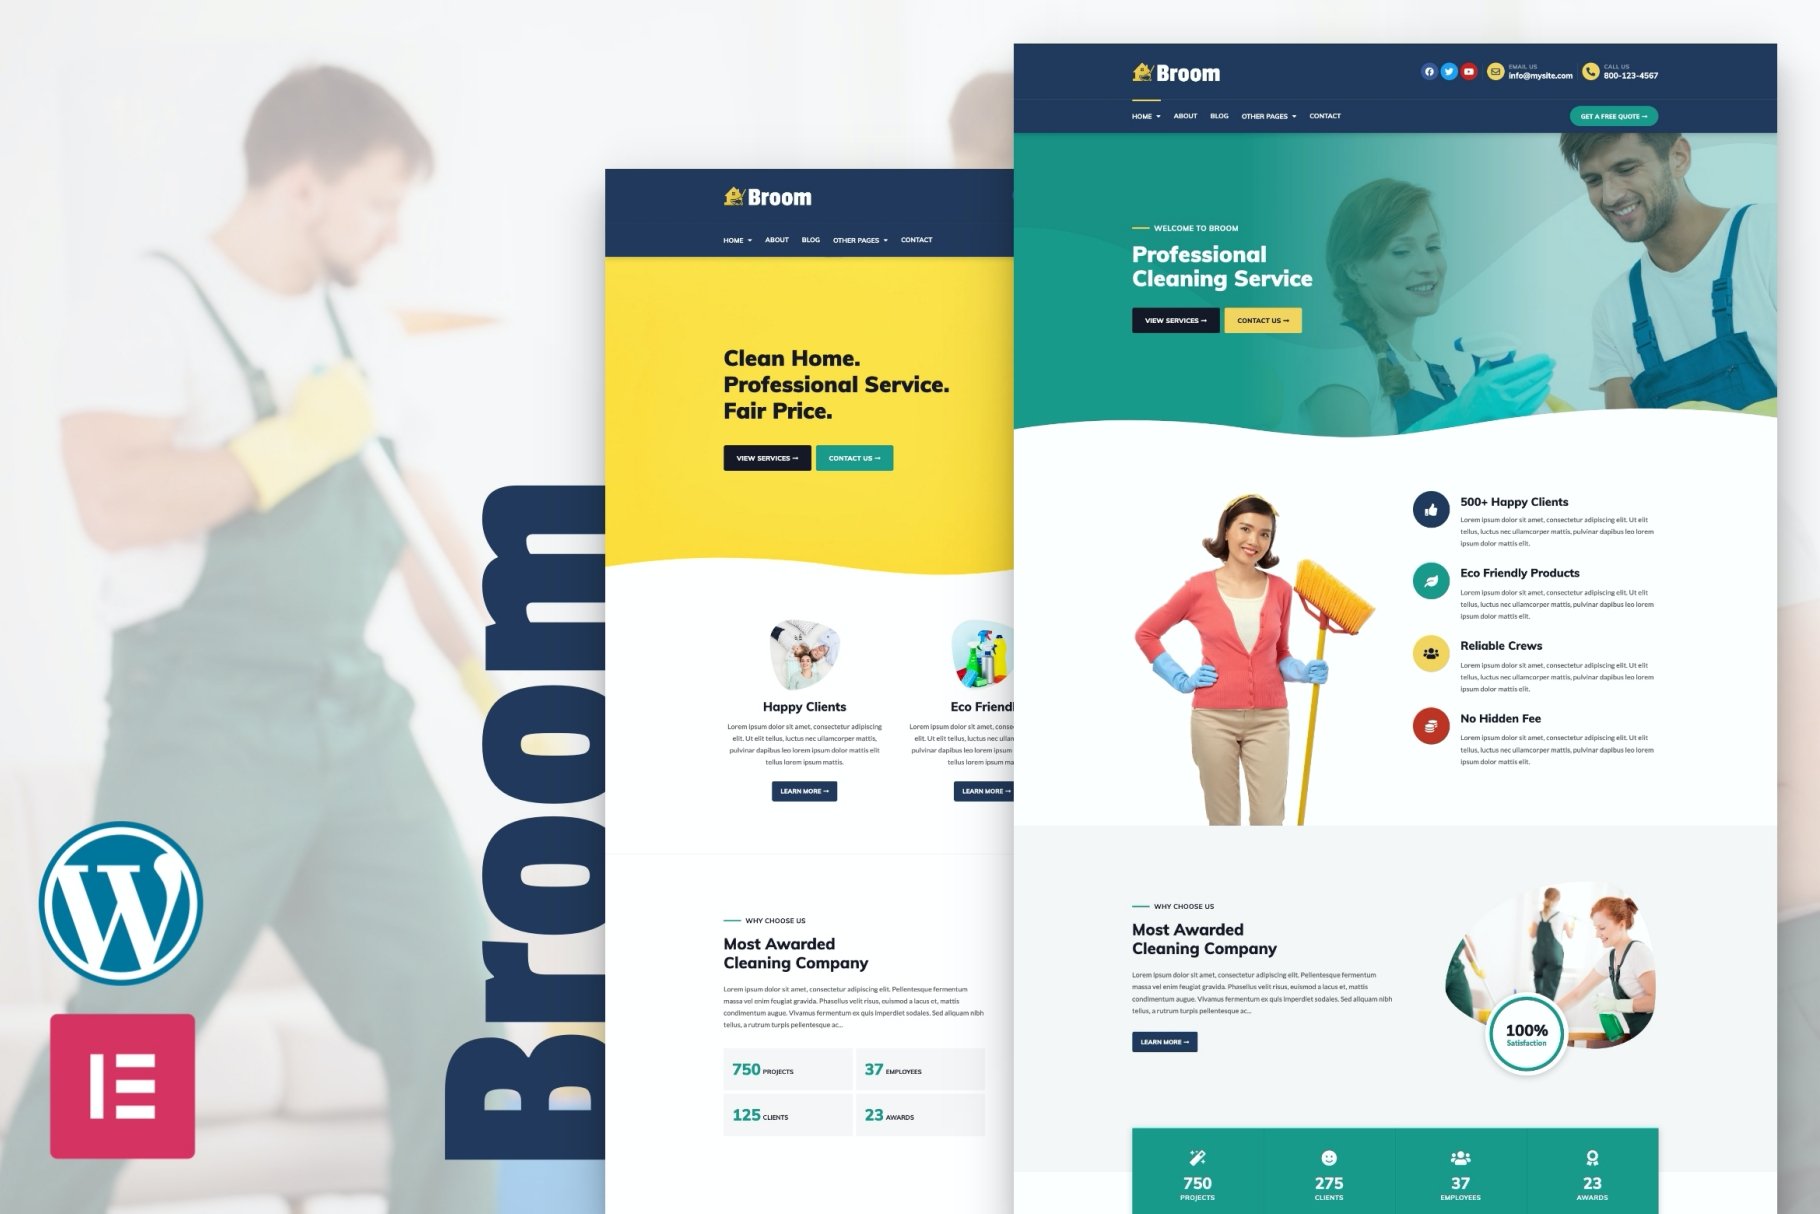 Broom - Cleaning Company WP Theme cover image.